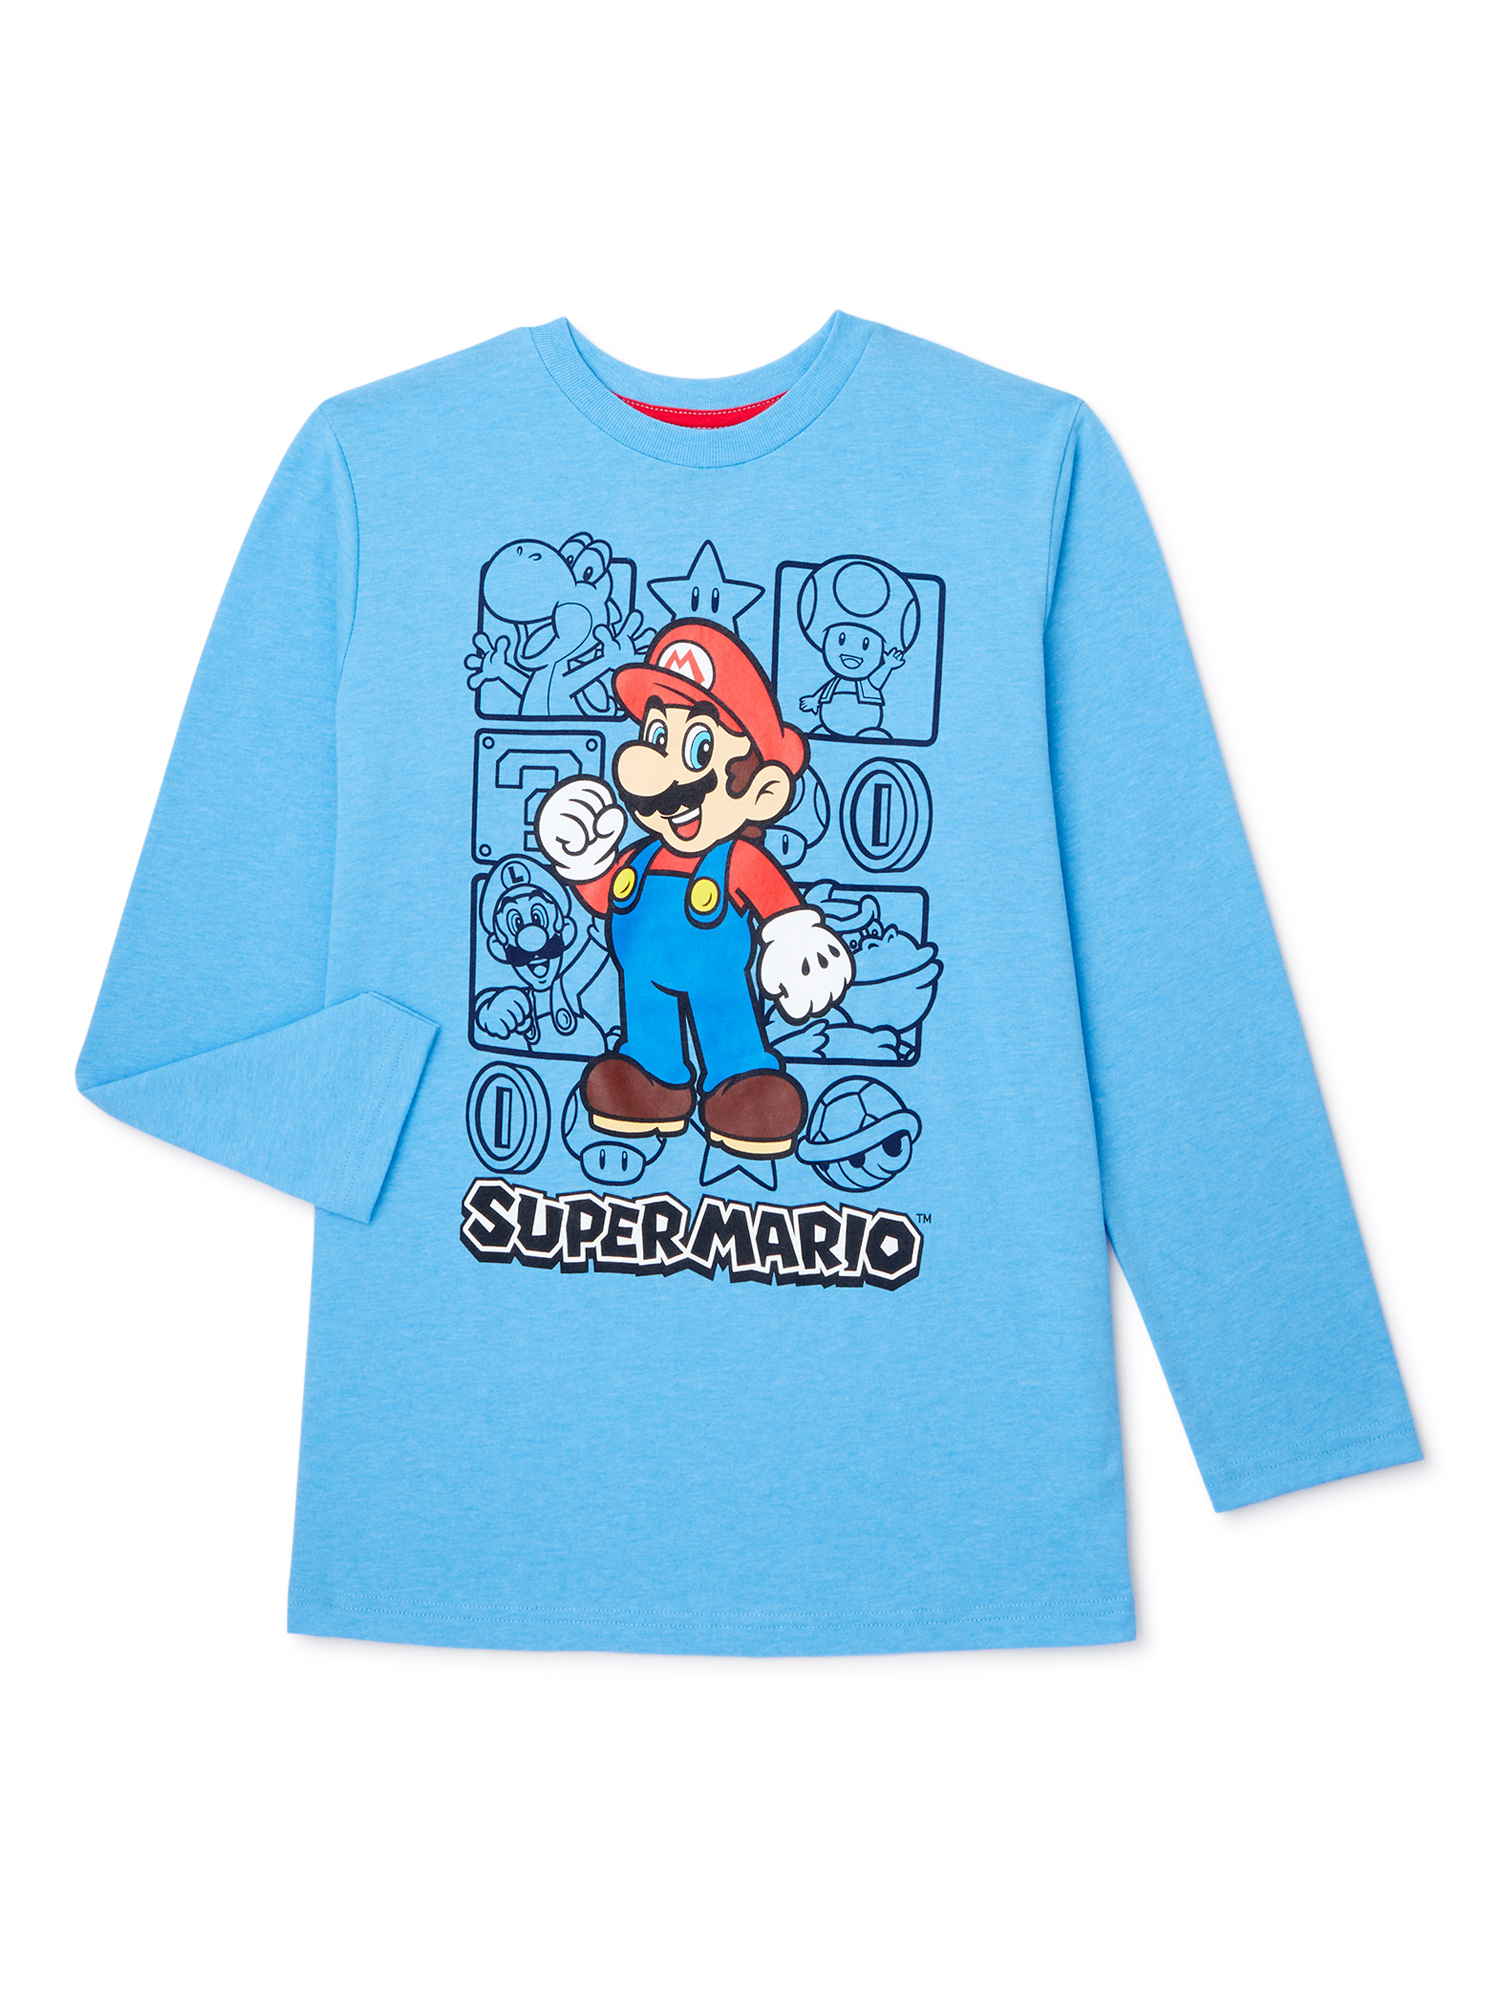 Super Mario Bros. Boys Classic!! Graphic Long Sleeve T-Shirt, Sizes 4-18 - image 1 of 3